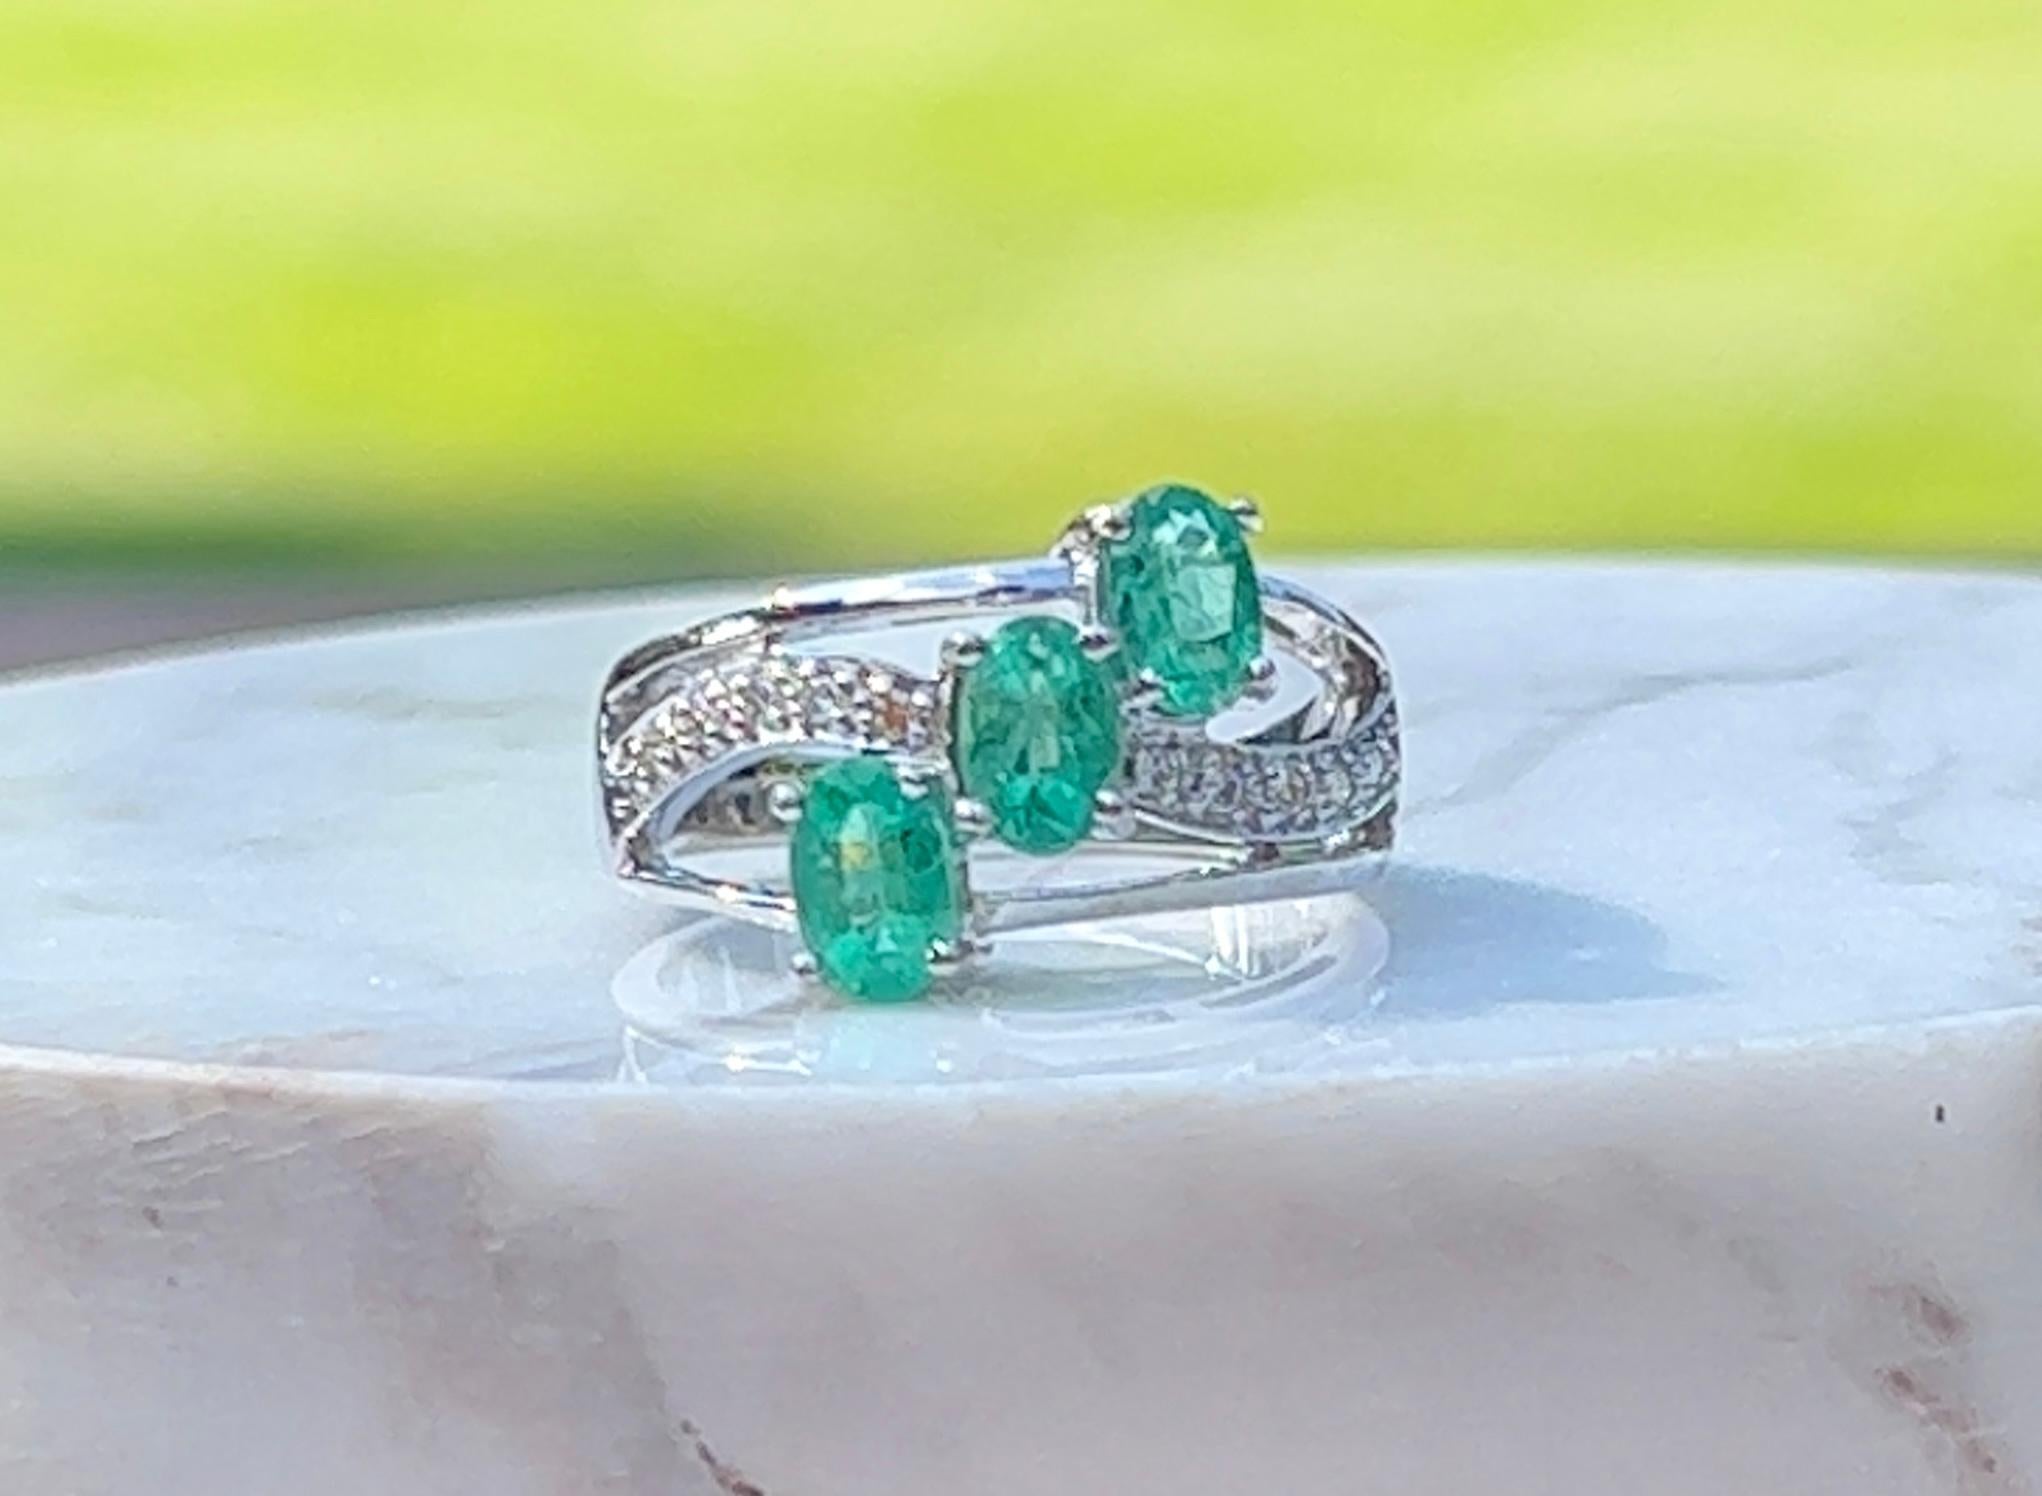 One 18-karat white gold ( stamped 18K) split shank design ring set with three (3) 6x4mm natural oval emeralds, approximately 1.50-carat total weight, and ten (10) round brilliant cut diamonds, approximately 0.15-carat total weight with matching H/I